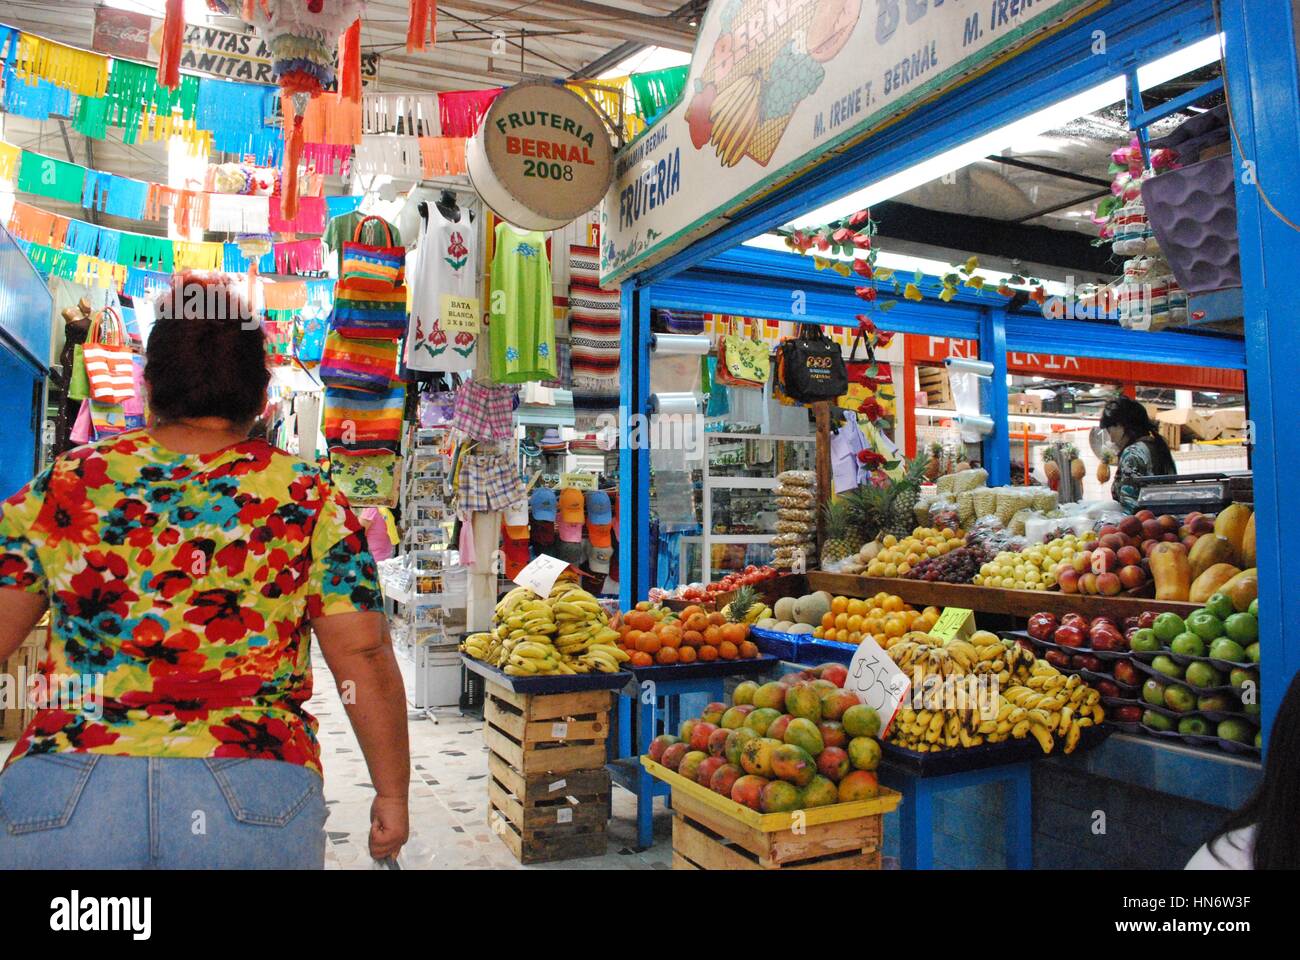 An indoor market in Mexico. Stock Photo